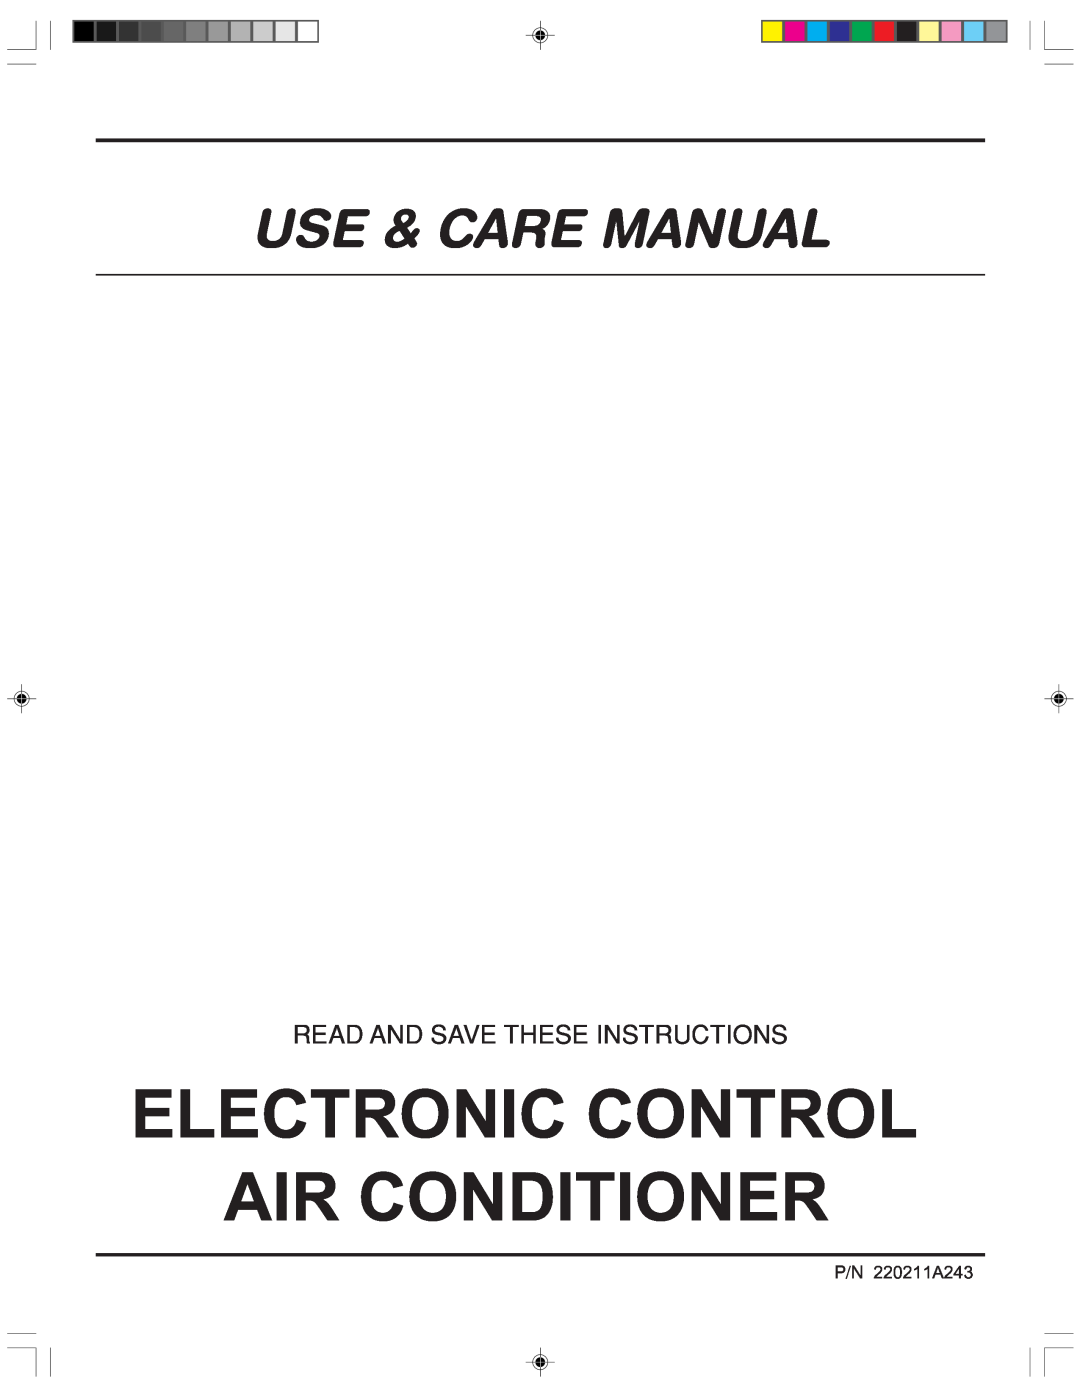 Frigidaire 220211A243 manual Electronic Control Air Conditioner, Use & Care Manual, Read And Save These Instructions 